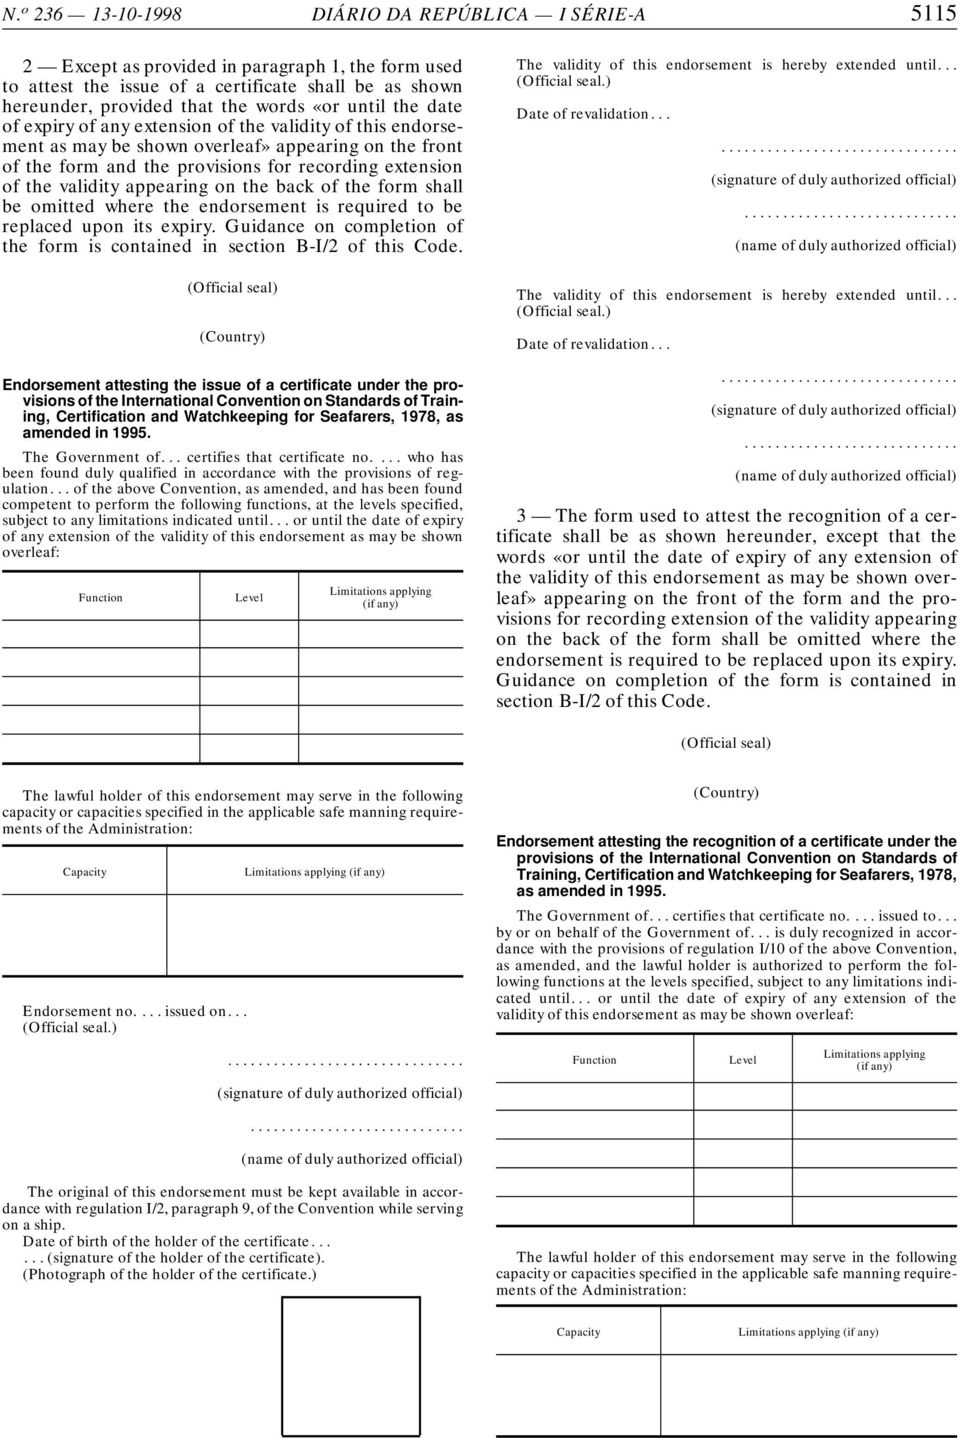 appearing on the back of the form shall be omitted where the endorsement is required to be replaced upon its expiry. Guidance on completion of the form is contained in section B-I/2 of this Code.